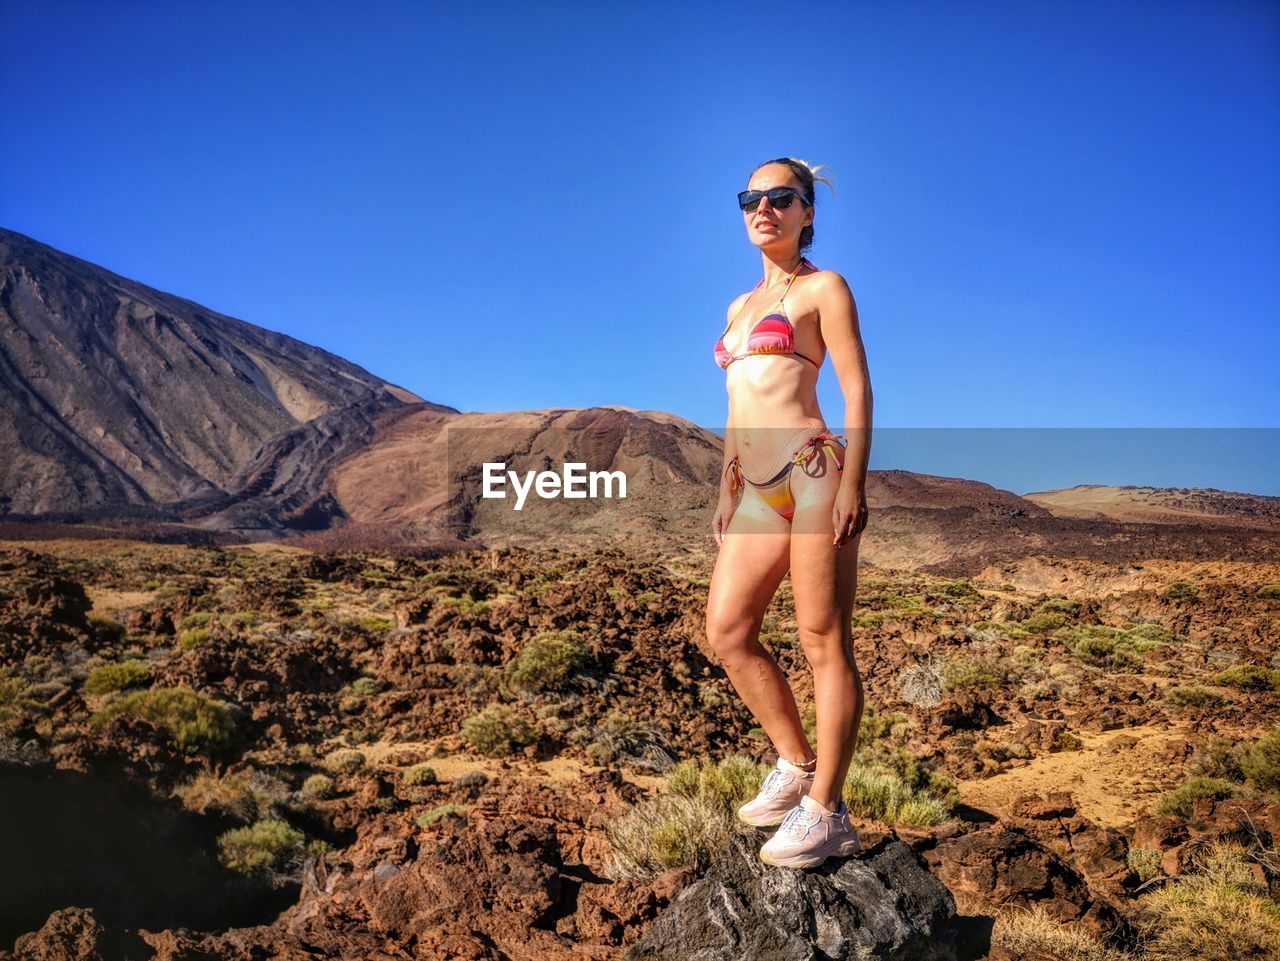 Woman wearing sunglasses while standing on rock against sky